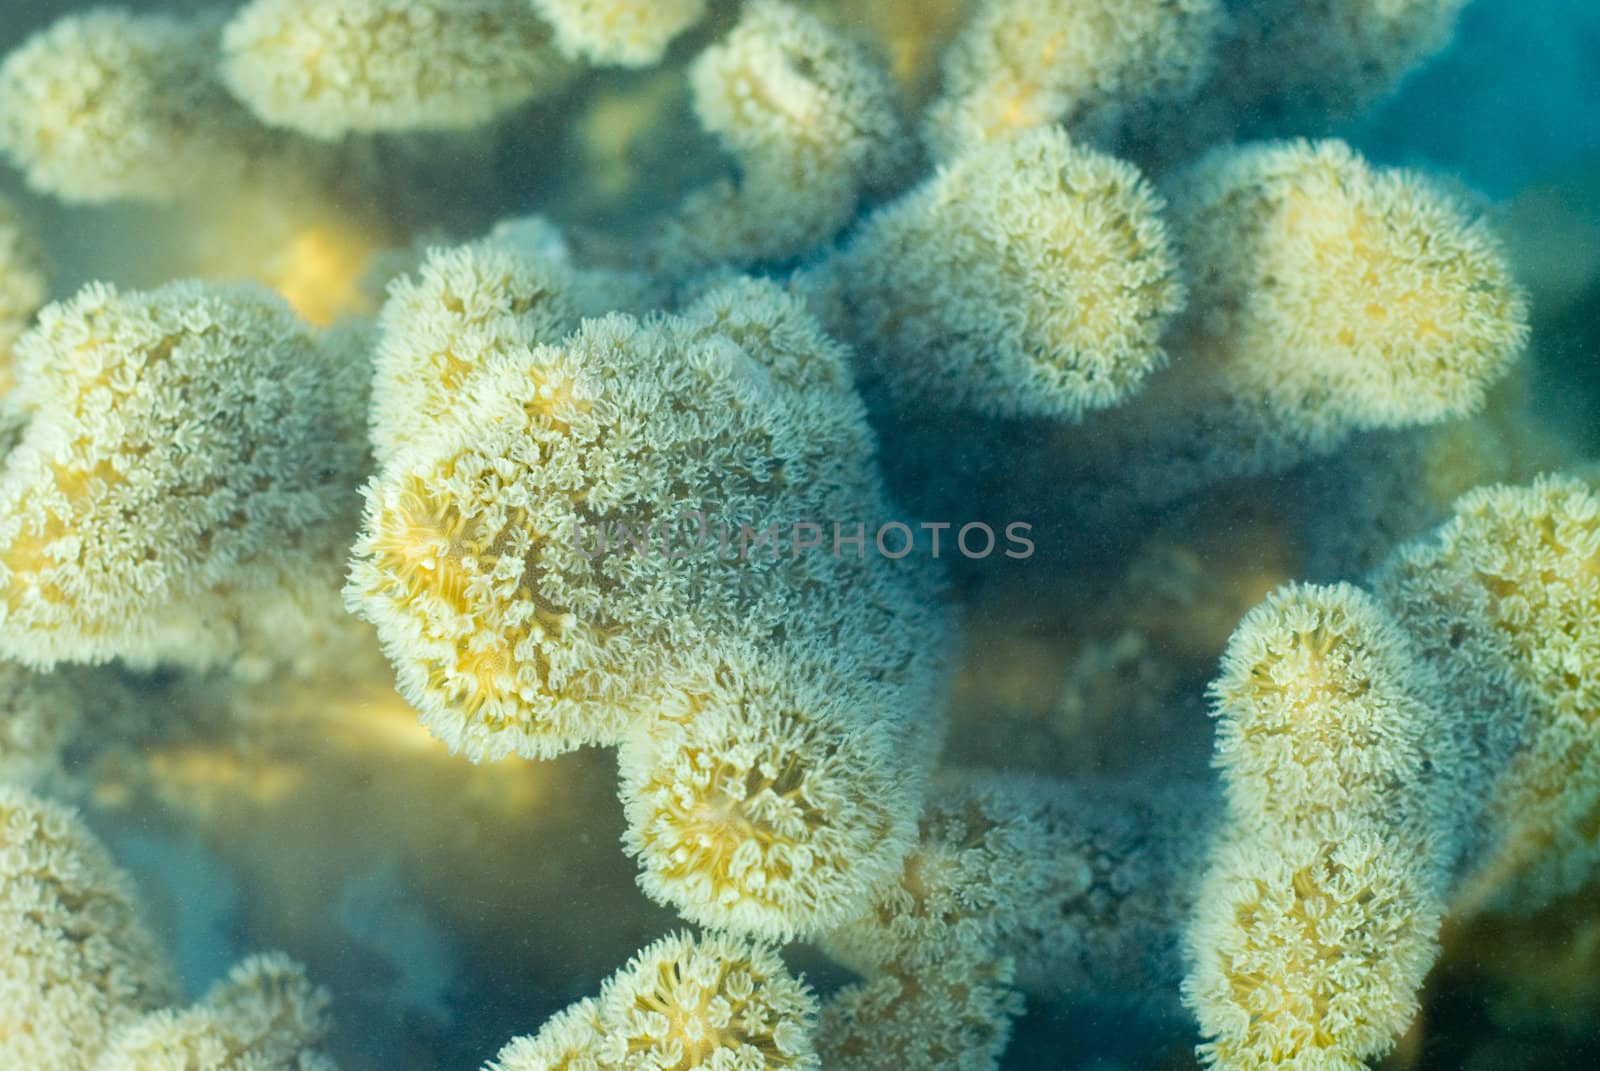 leather coral polyps by stockarch